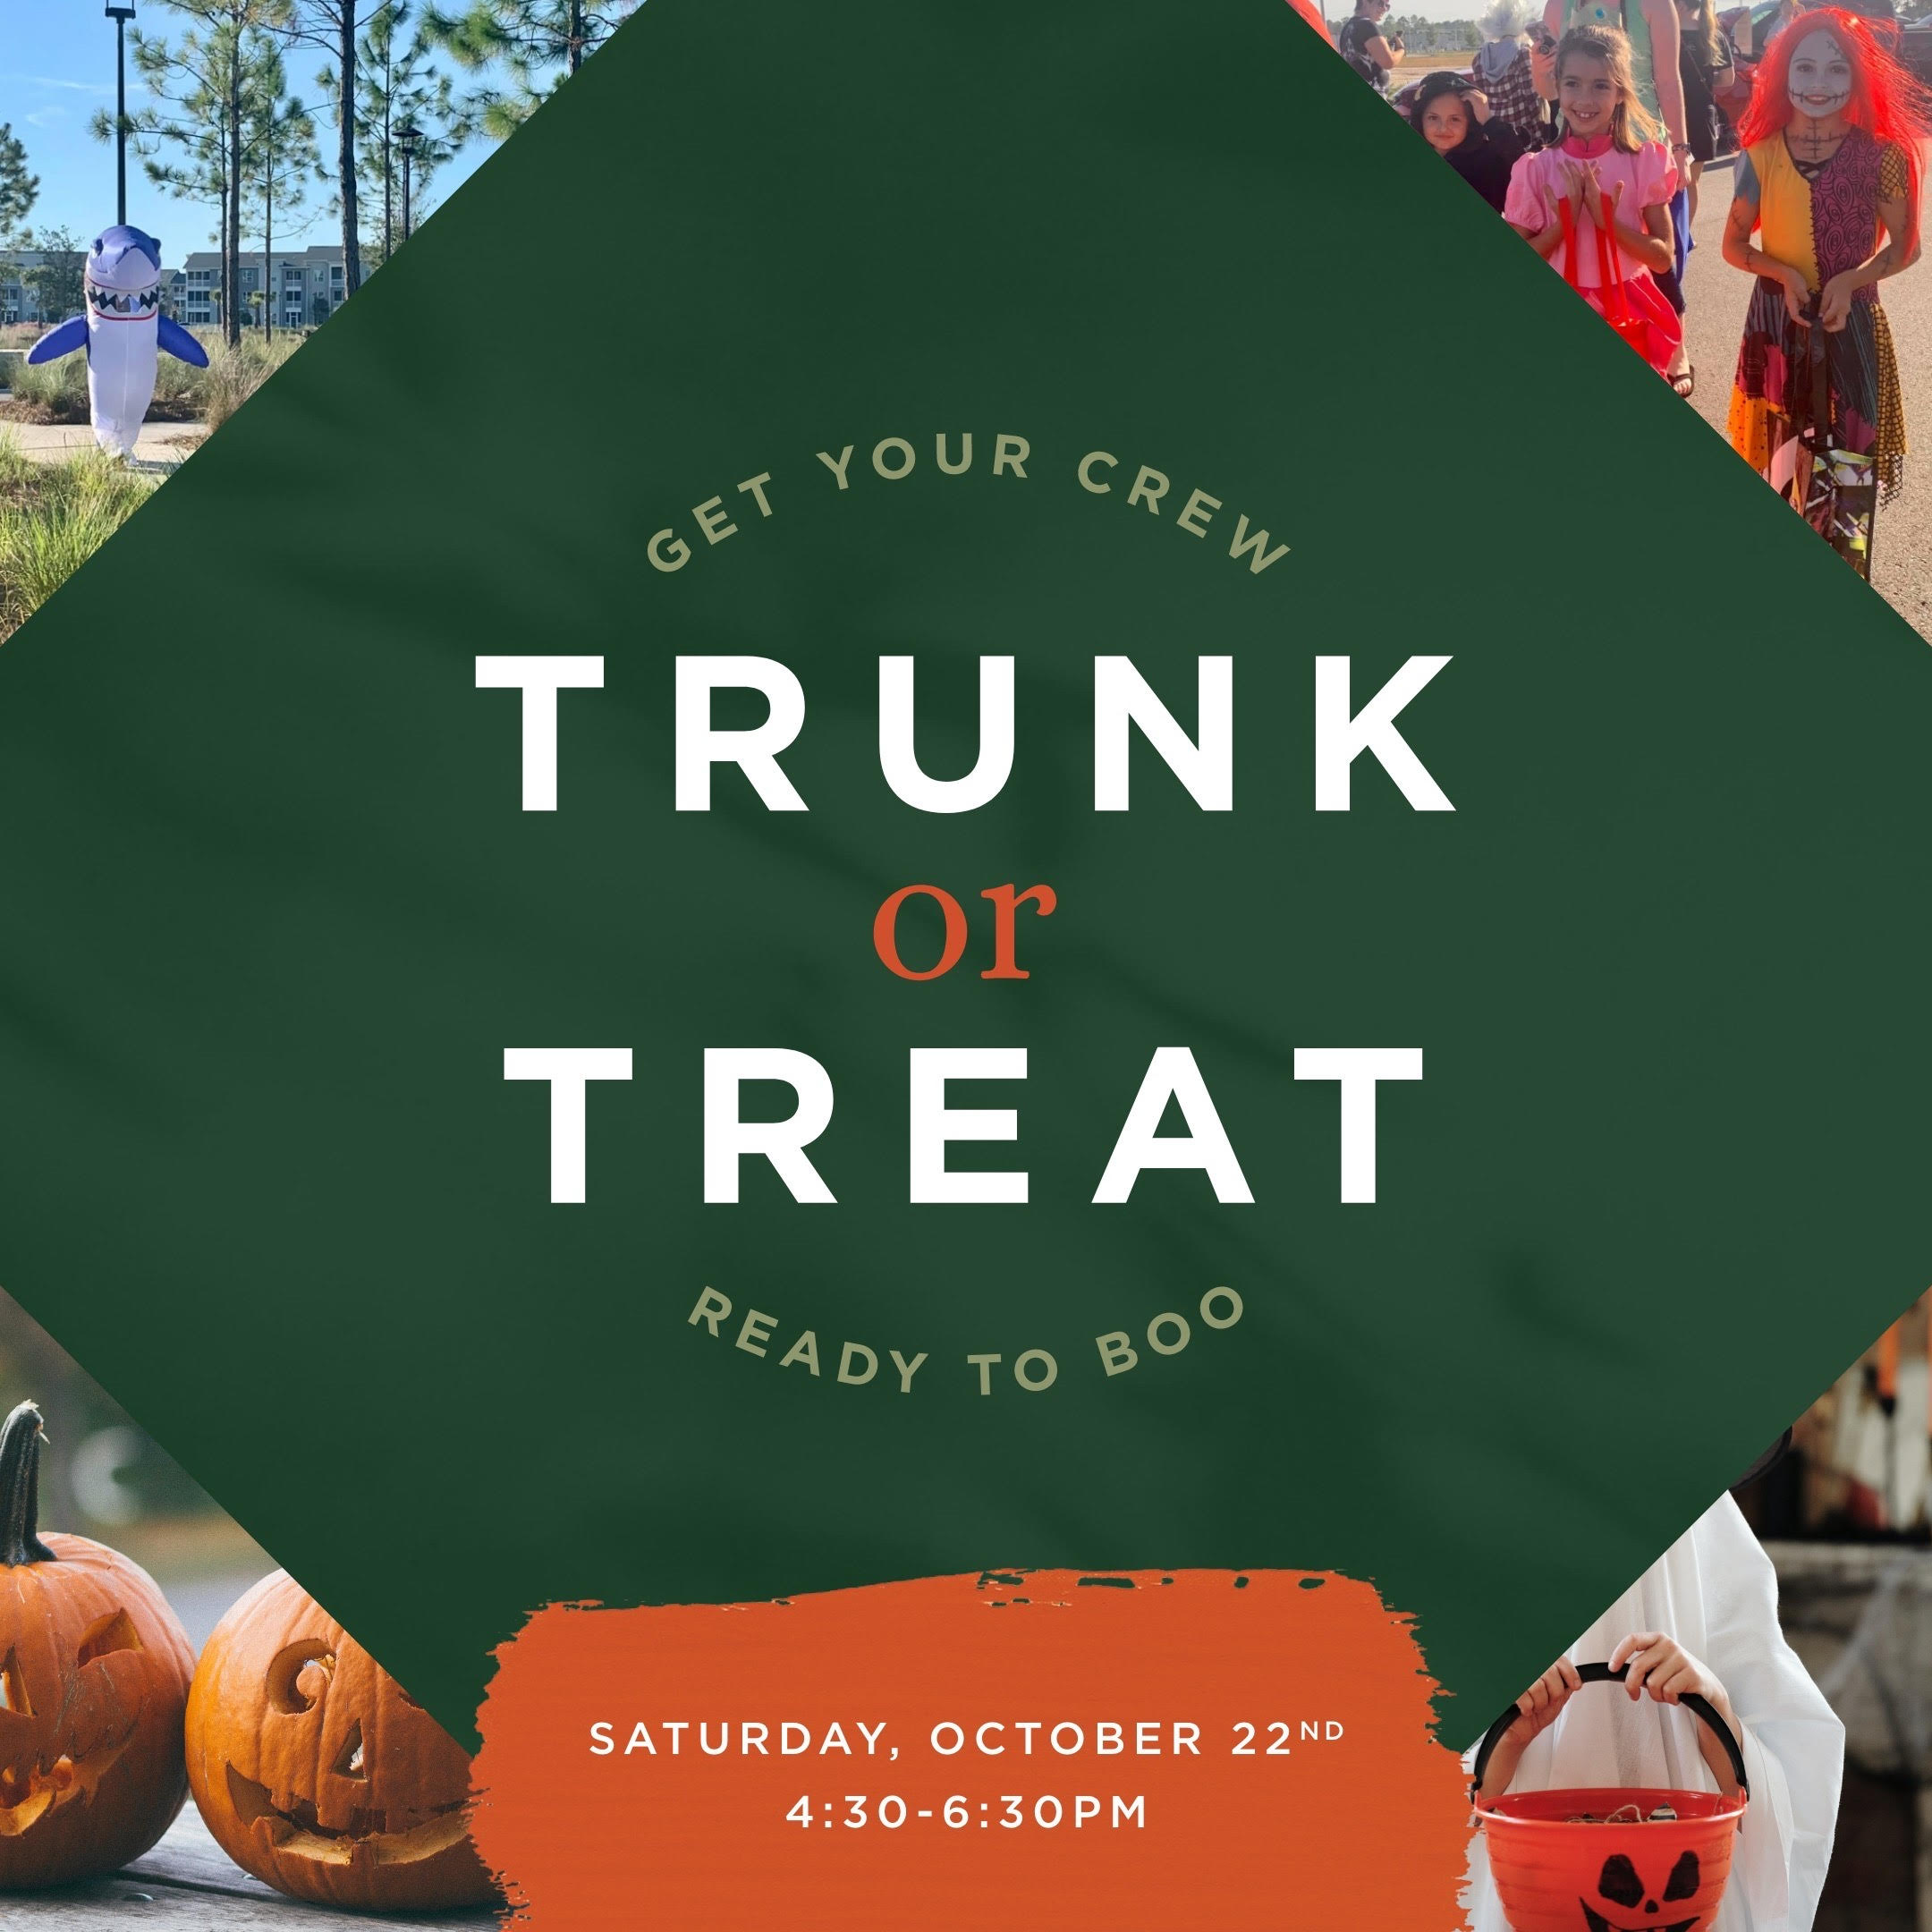 Get your crew trunk or treat ready to go.